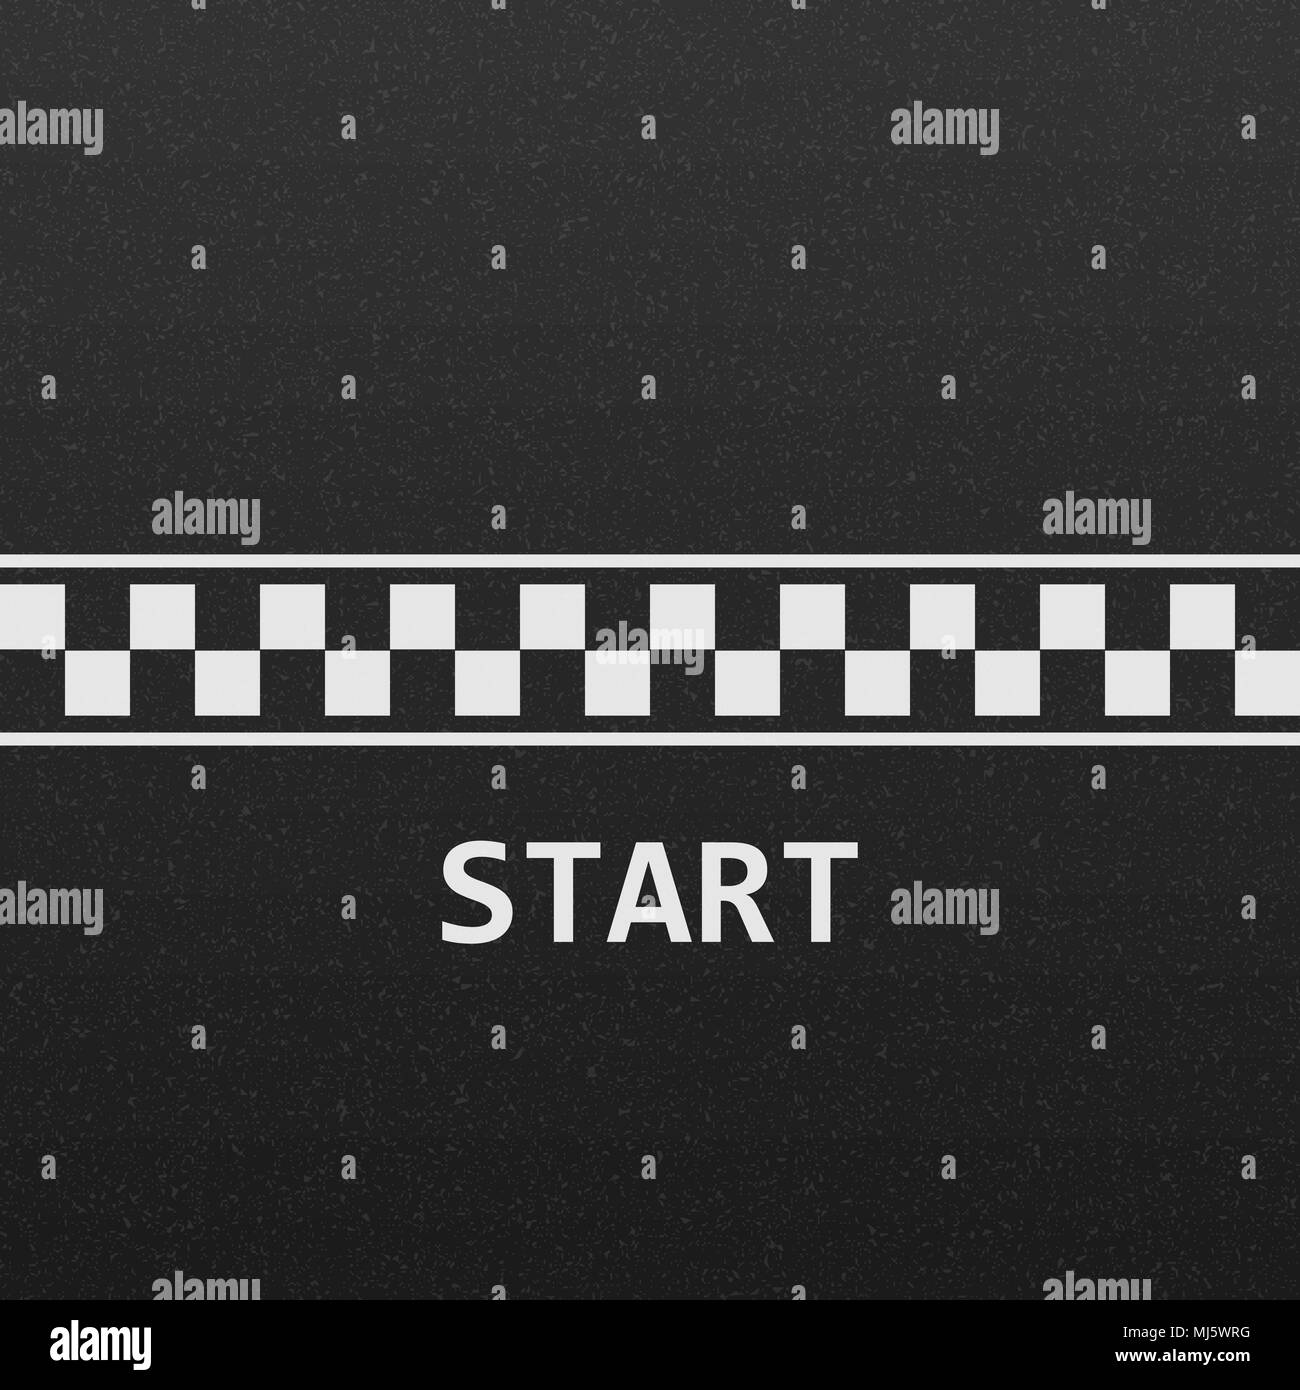 start line race track background top view. Grunge textured on the asphalt road Stock Vector